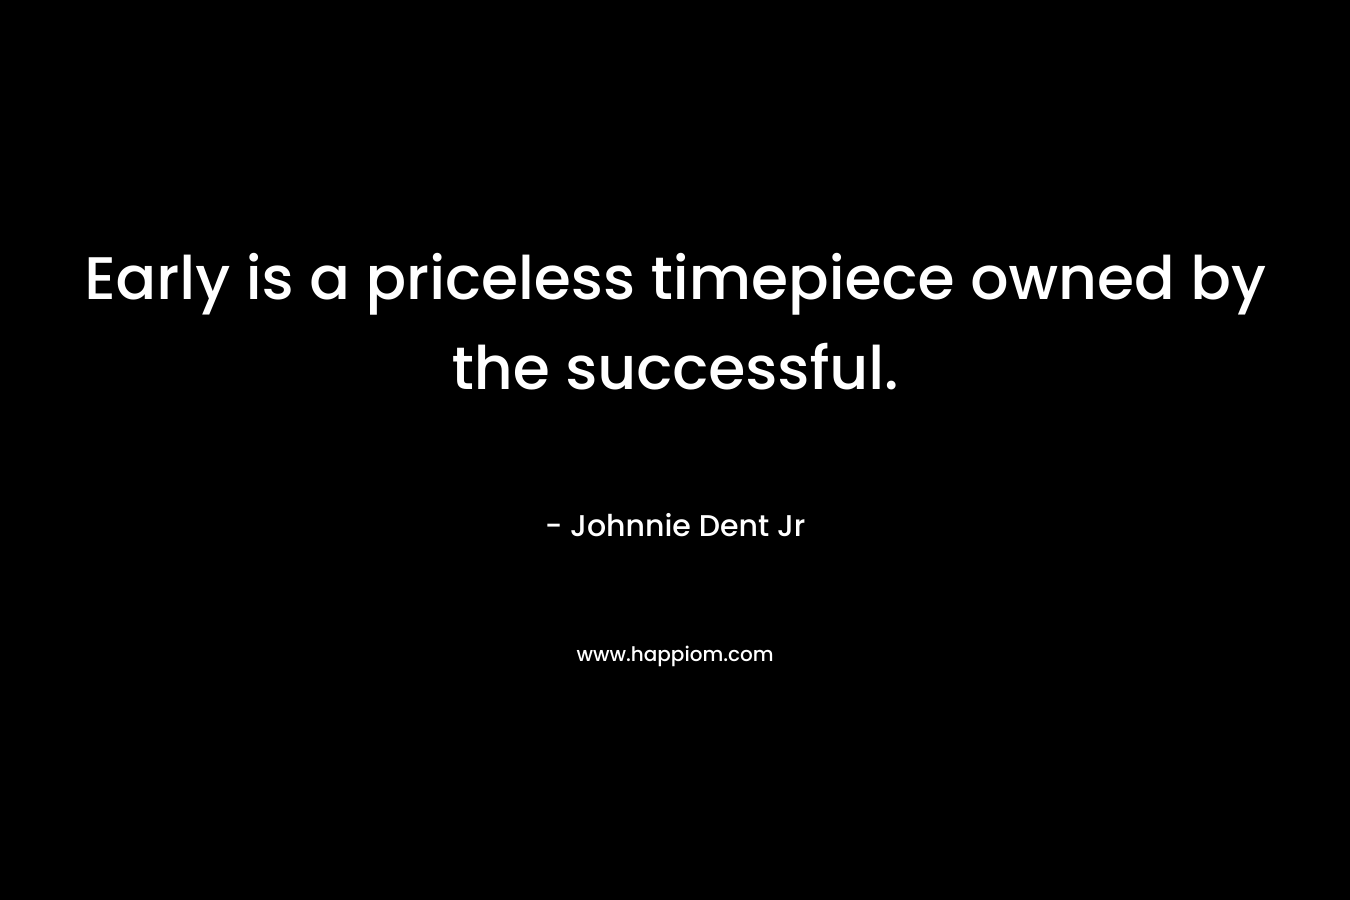 Early is a priceless timepiece owned by the successful. – Johnnie Dent Jr